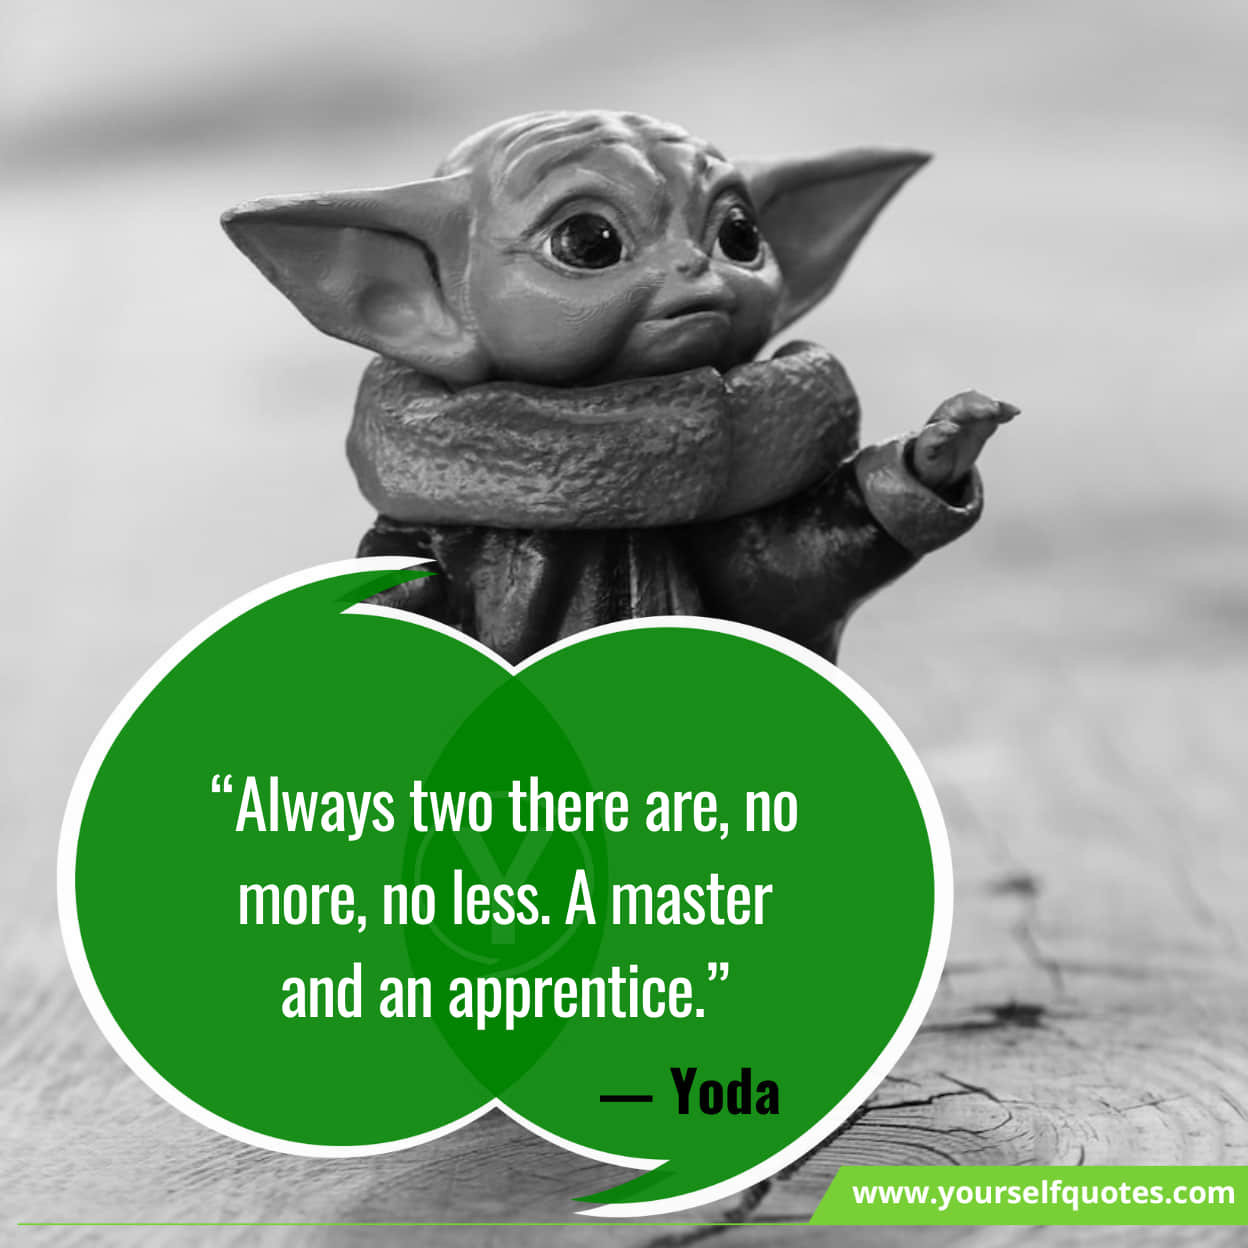 Yoda Quotes For Real LIfe Happiness